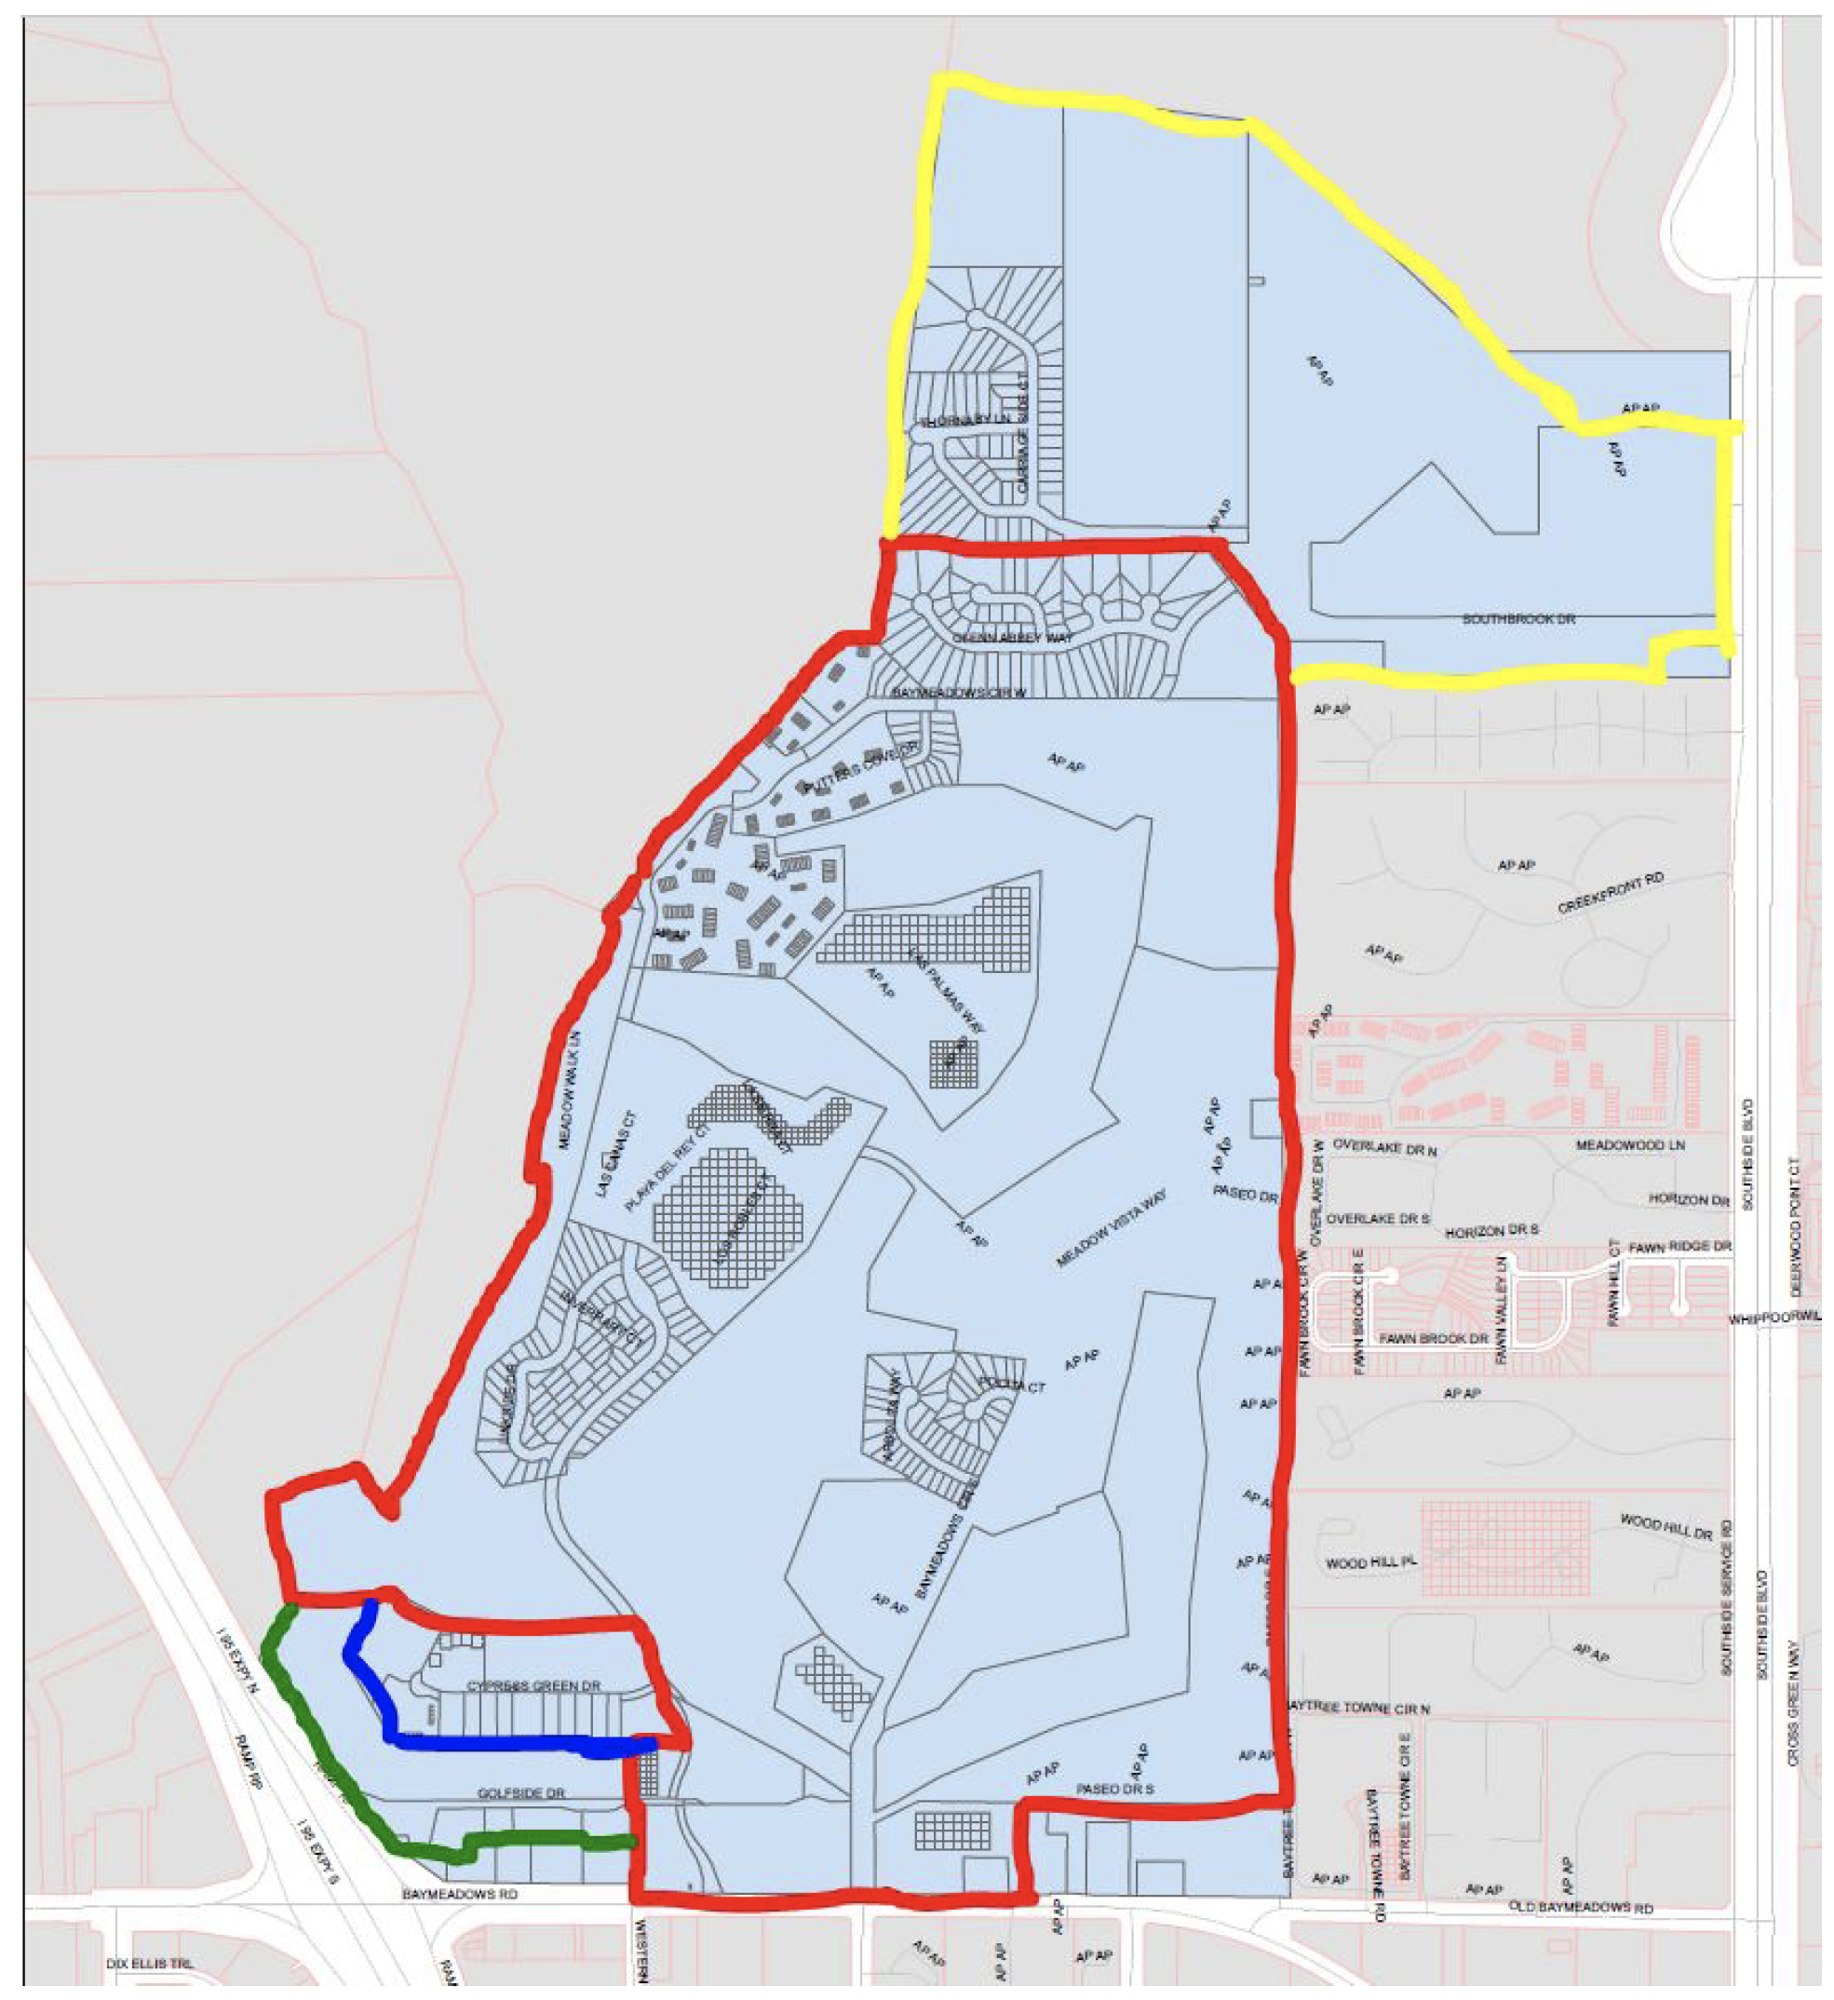 The area of the proposed Dependent Special Taxing District in Baymeadows.